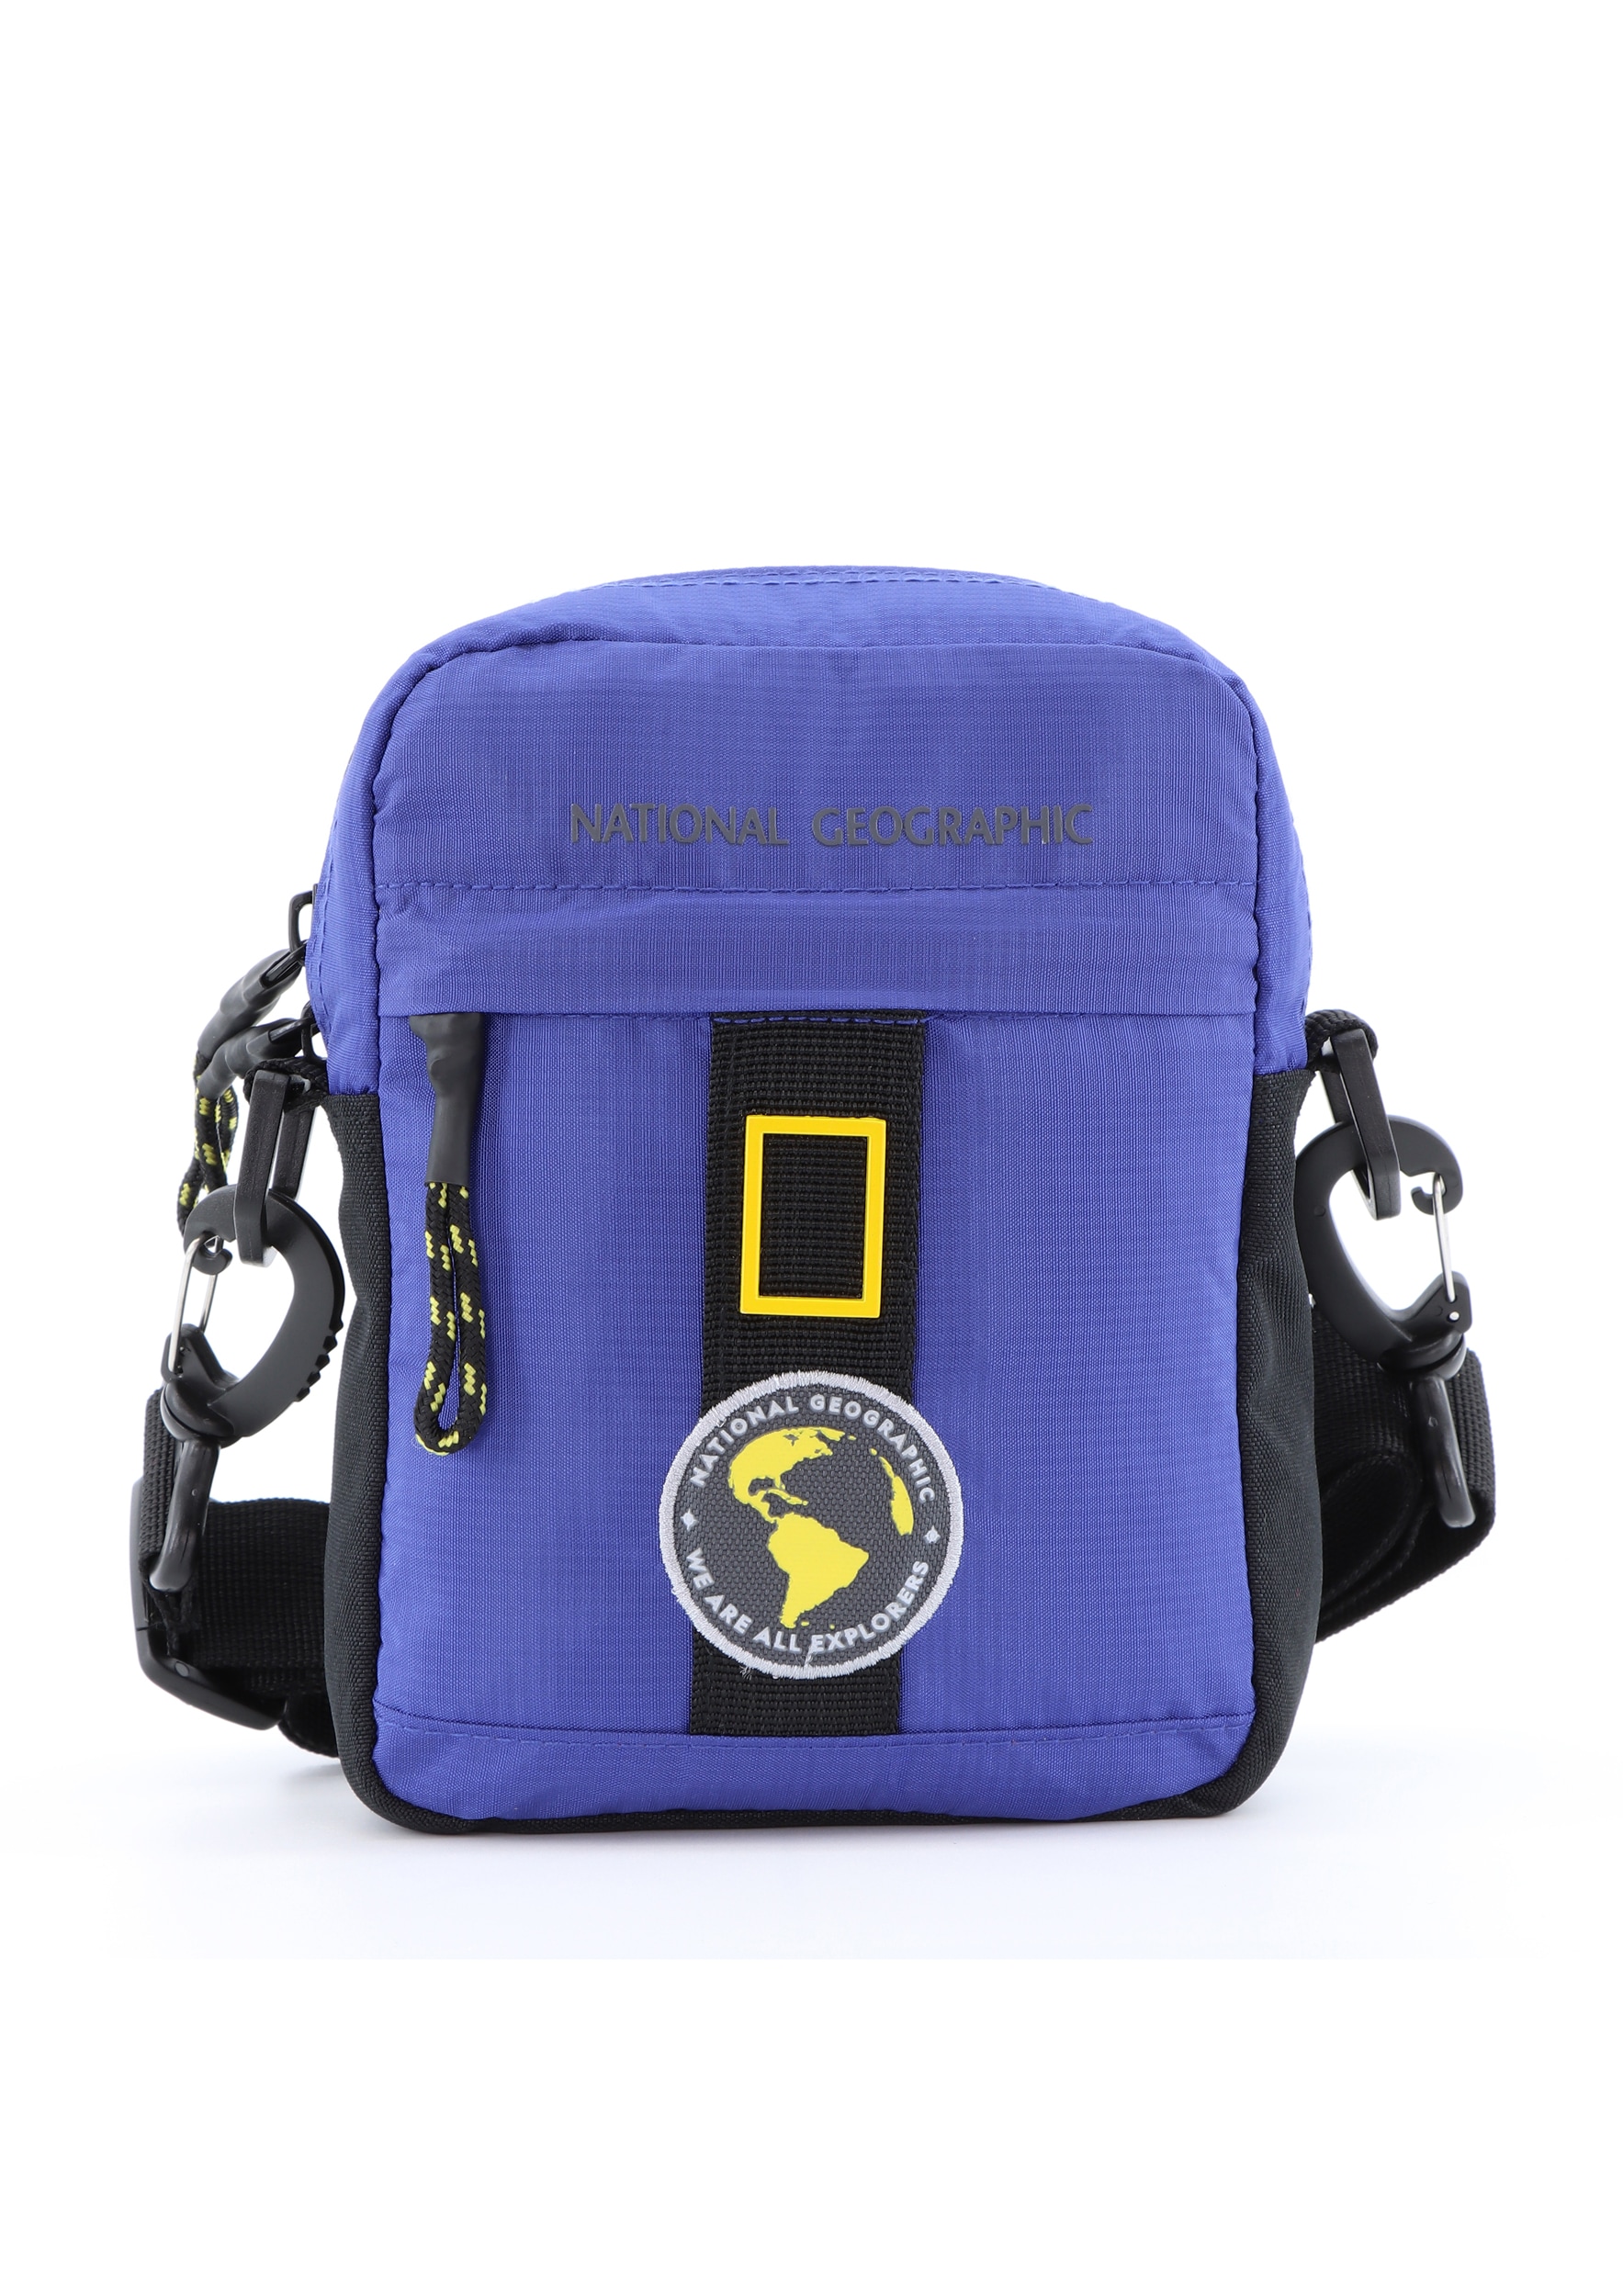 NATIONAL GEOGRAPHIC Schultertasche »New Explorer«, Ripstop